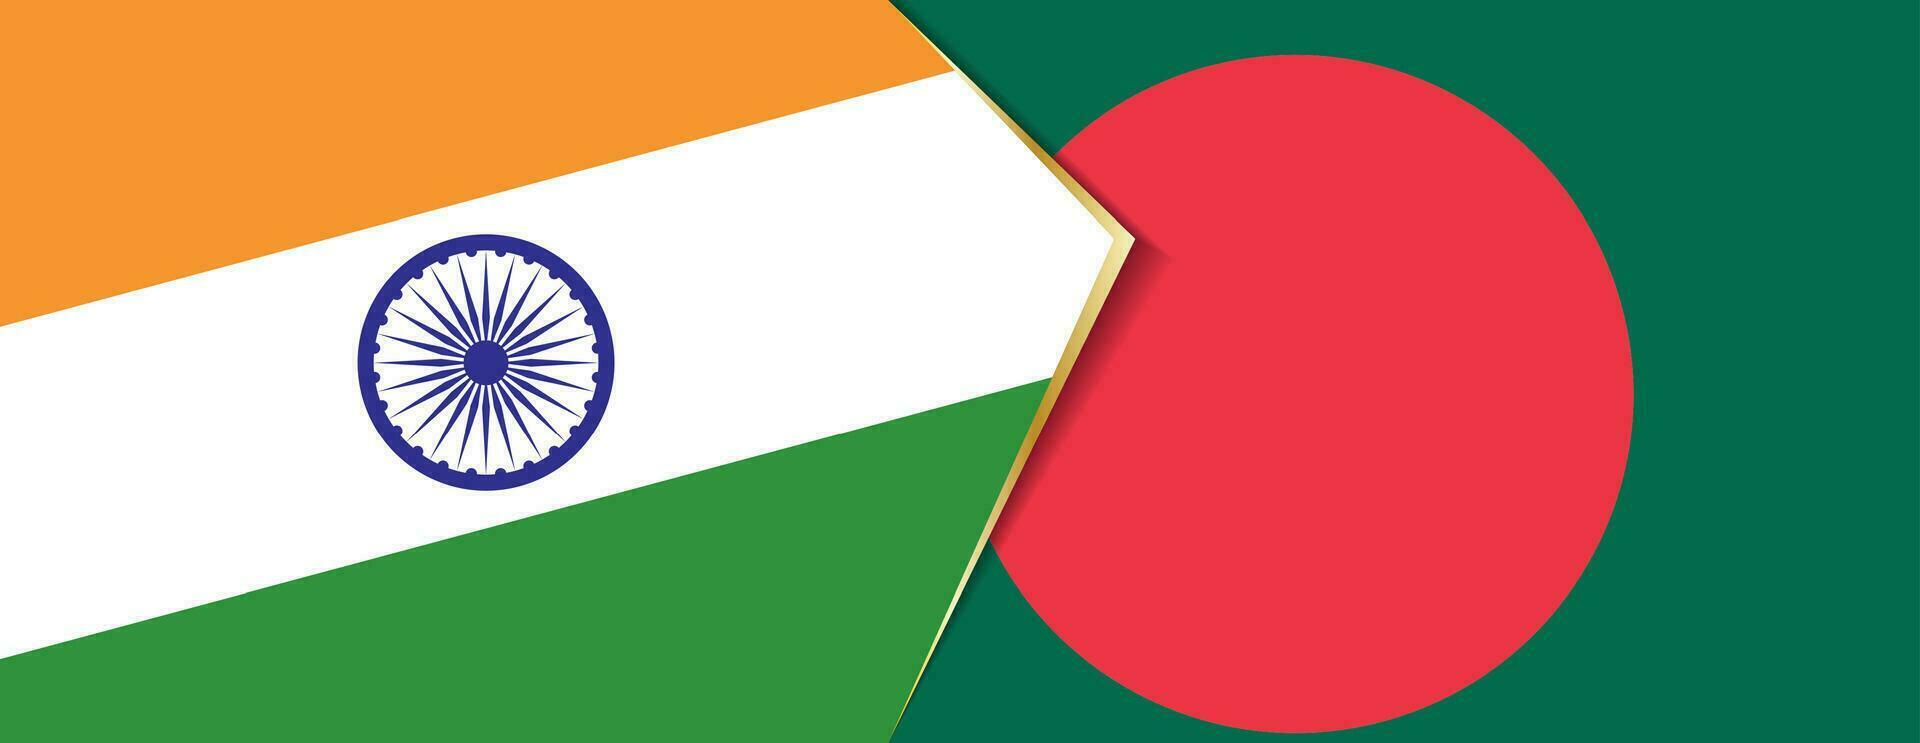 India and Bangladesh flags, two vector flags.